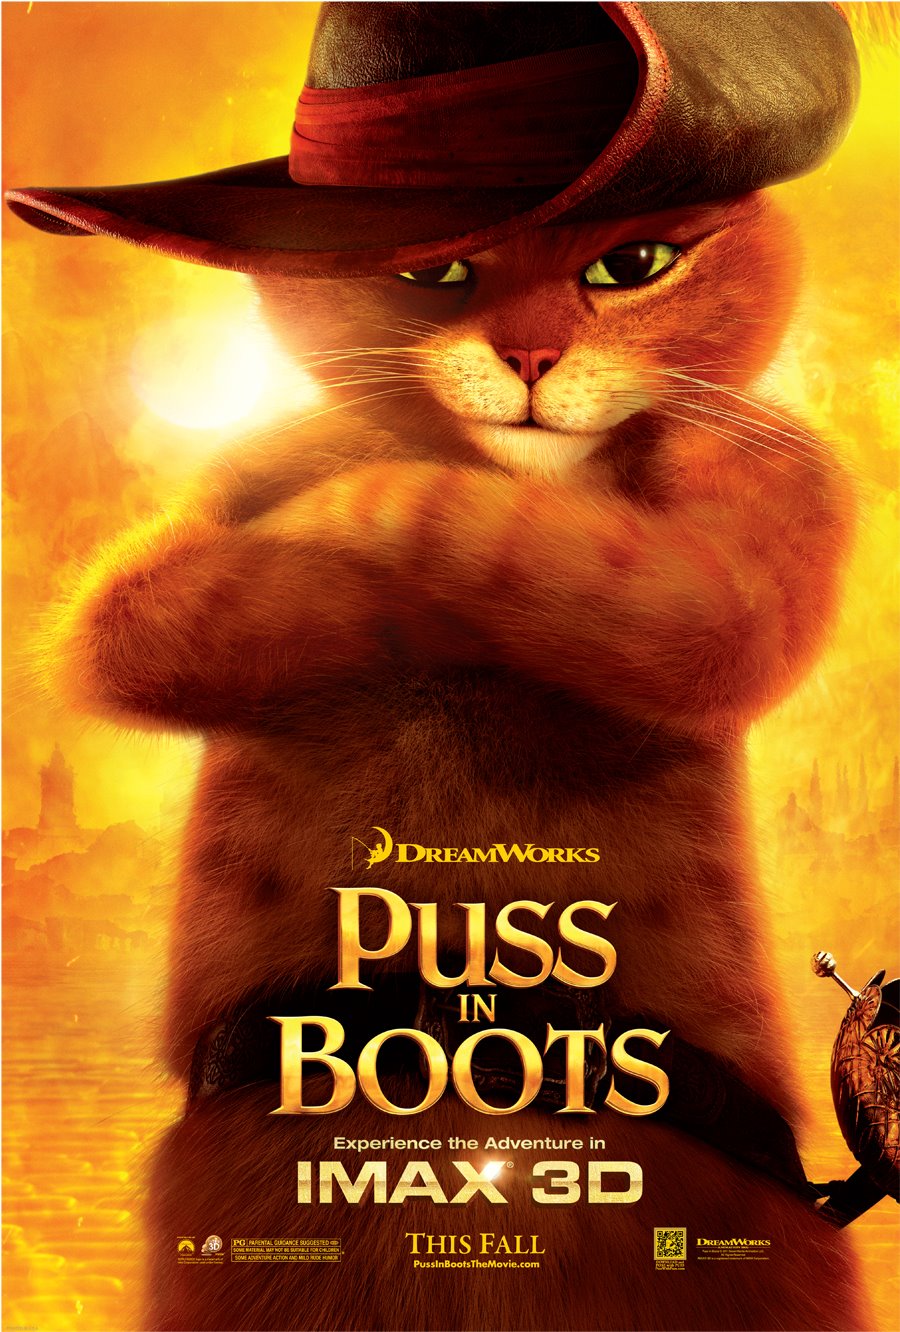 Review “Puss in Boots” the movie isn’t nearly as awesome as “Puss in